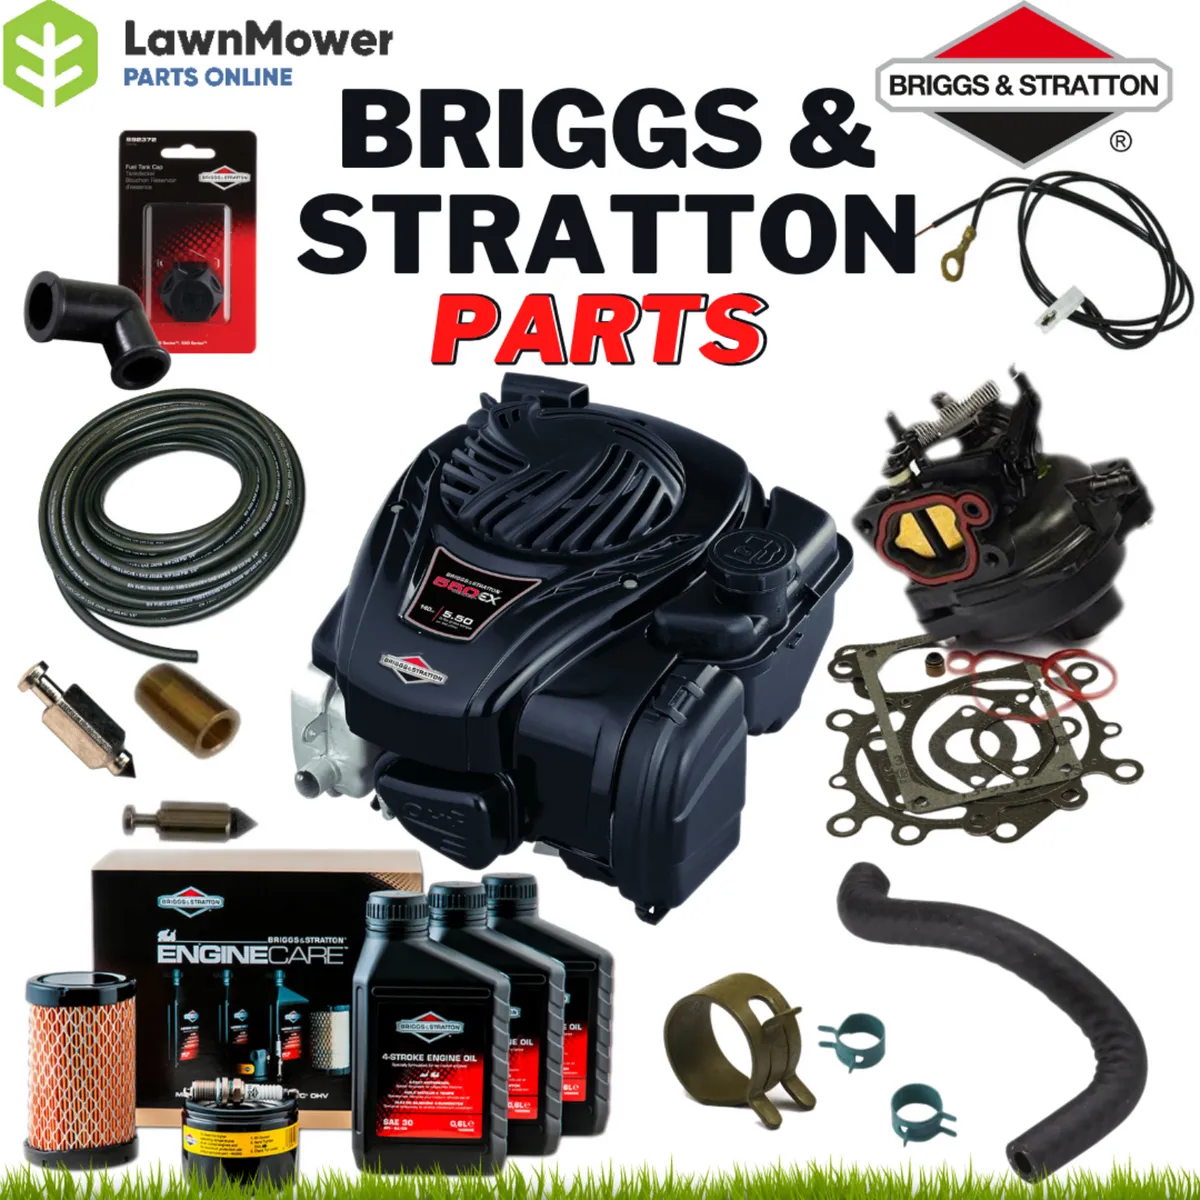 Briggs and Stratton Parts: FREE DELIVERY